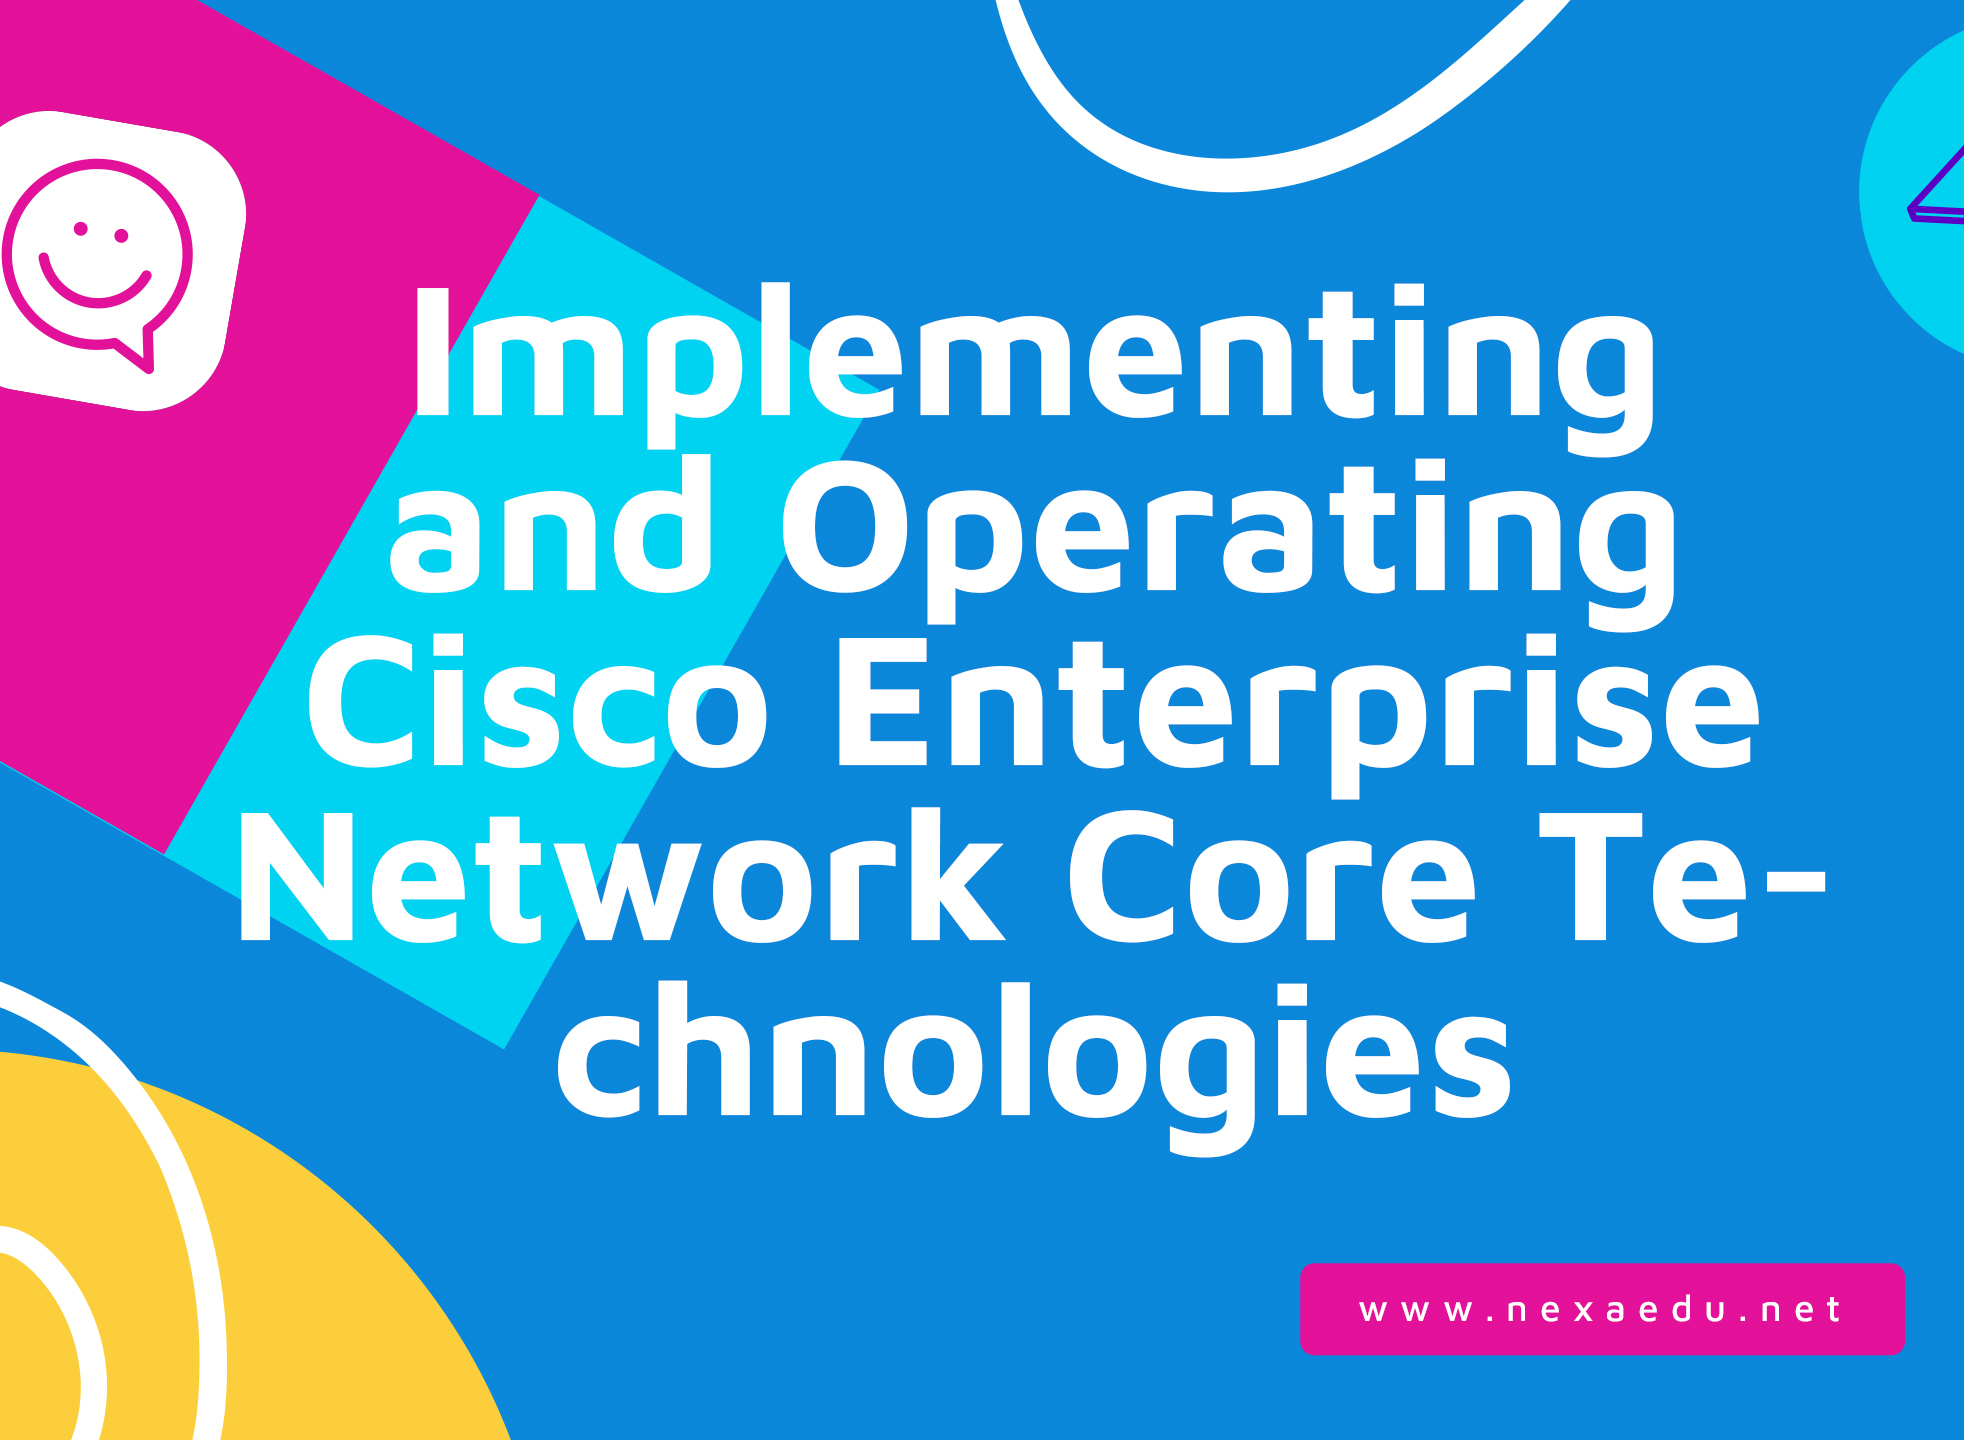 Implementing and Operating Cisco Enterprise Network Core Technologies